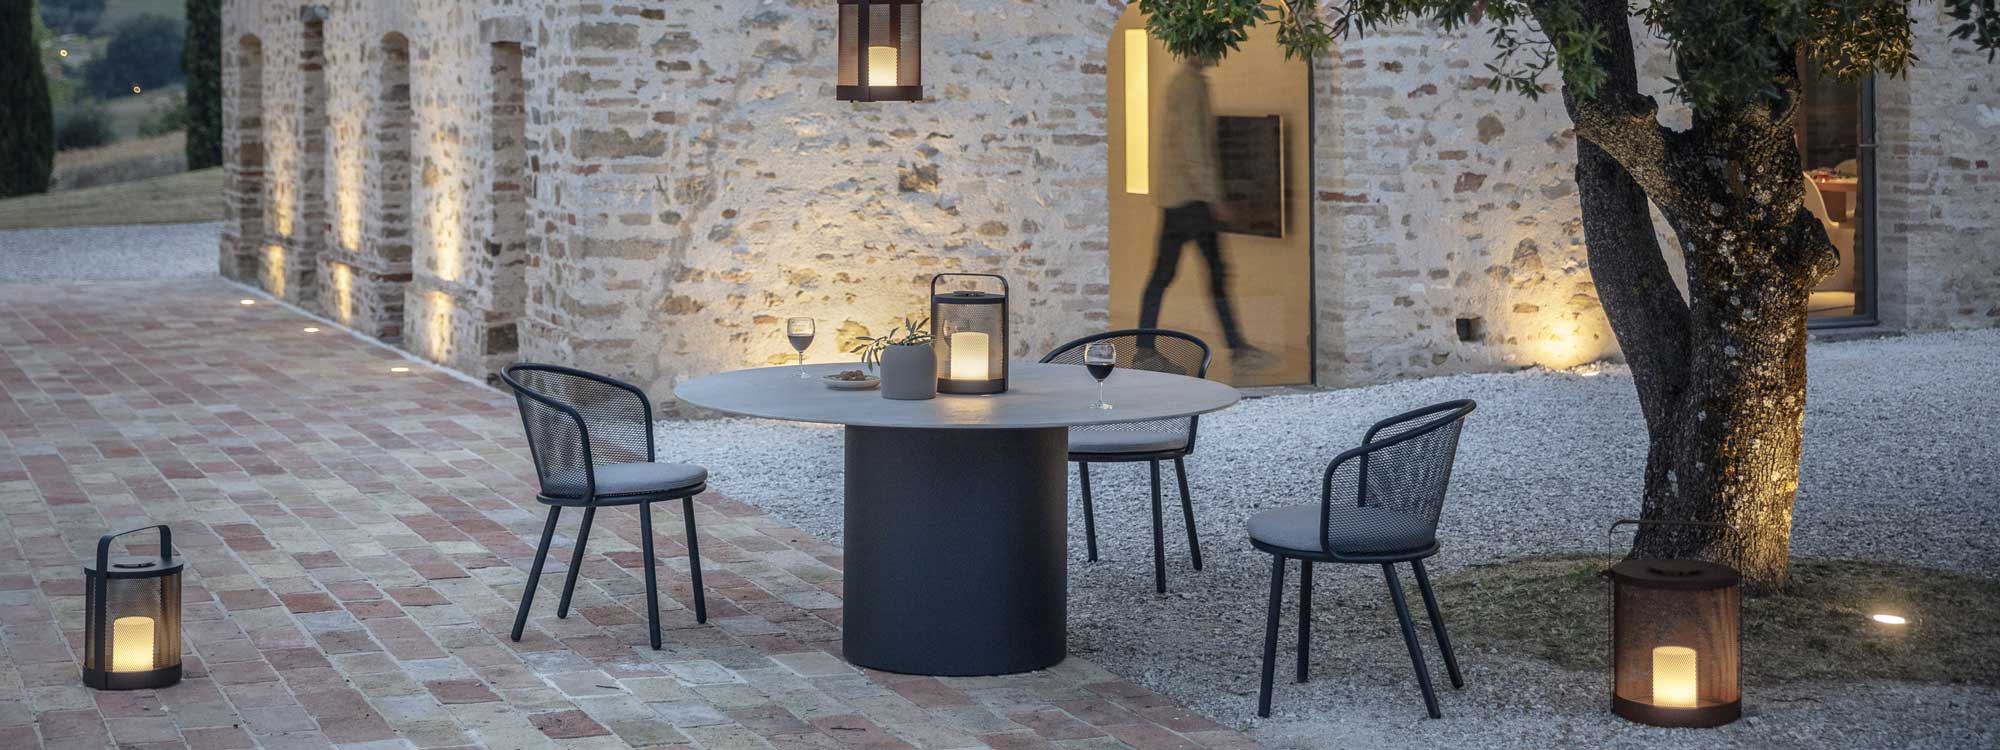 Dusk shot of Baza modern garden chair and Branta circular dining table designed by Studio Segers for Todus furniture company